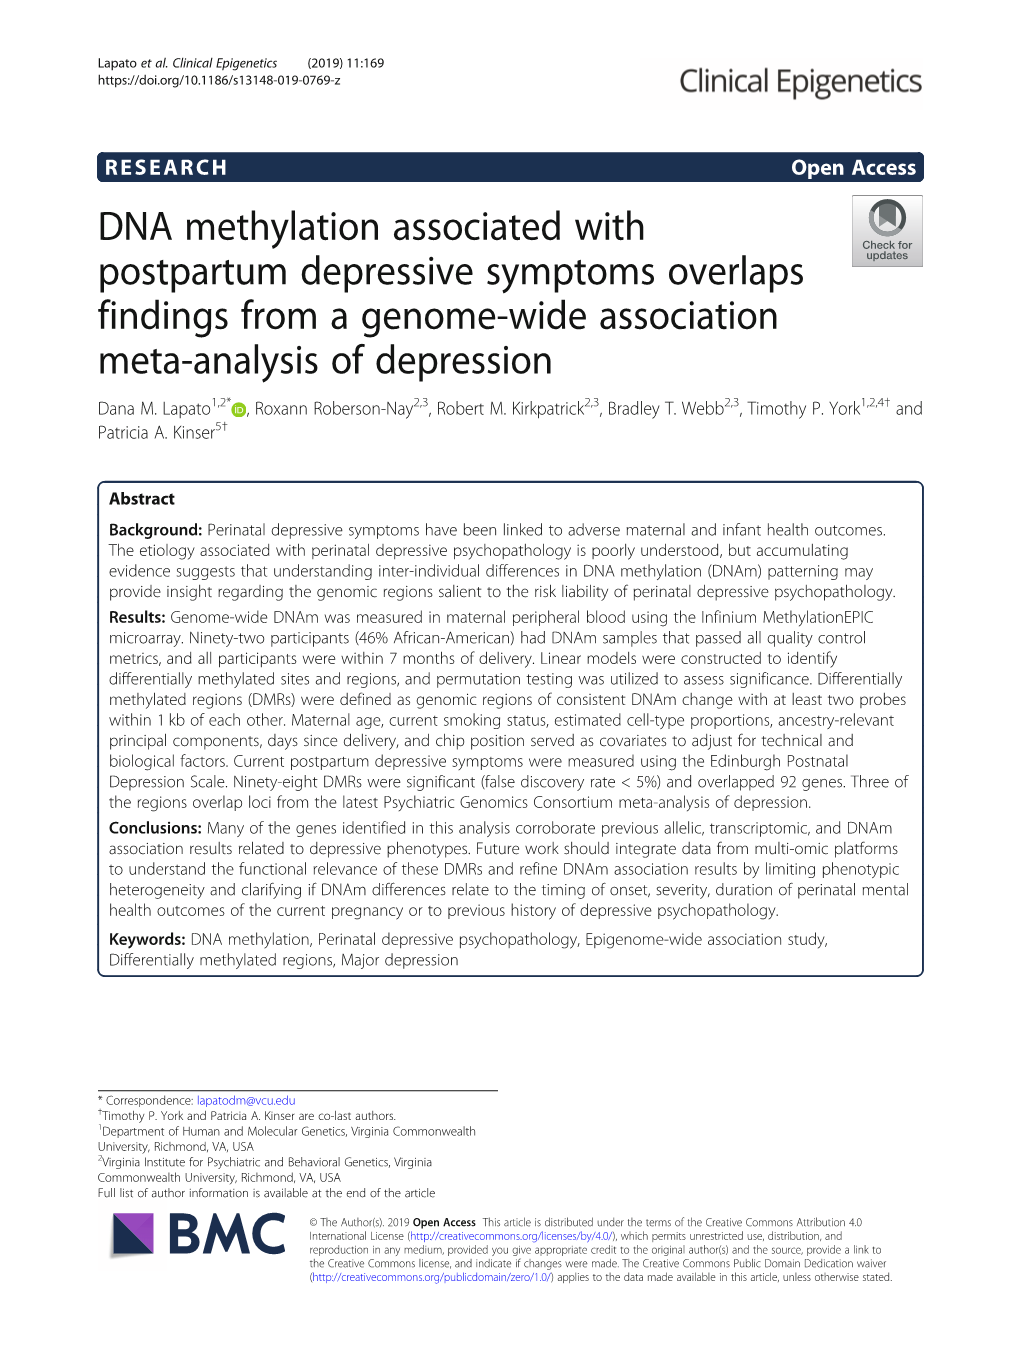 DNA Methylation Associated with Postpartum Depressive Symptoms Overlaps Findings from a Genome-Wide Association Meta-Analysis of Depression Dana M